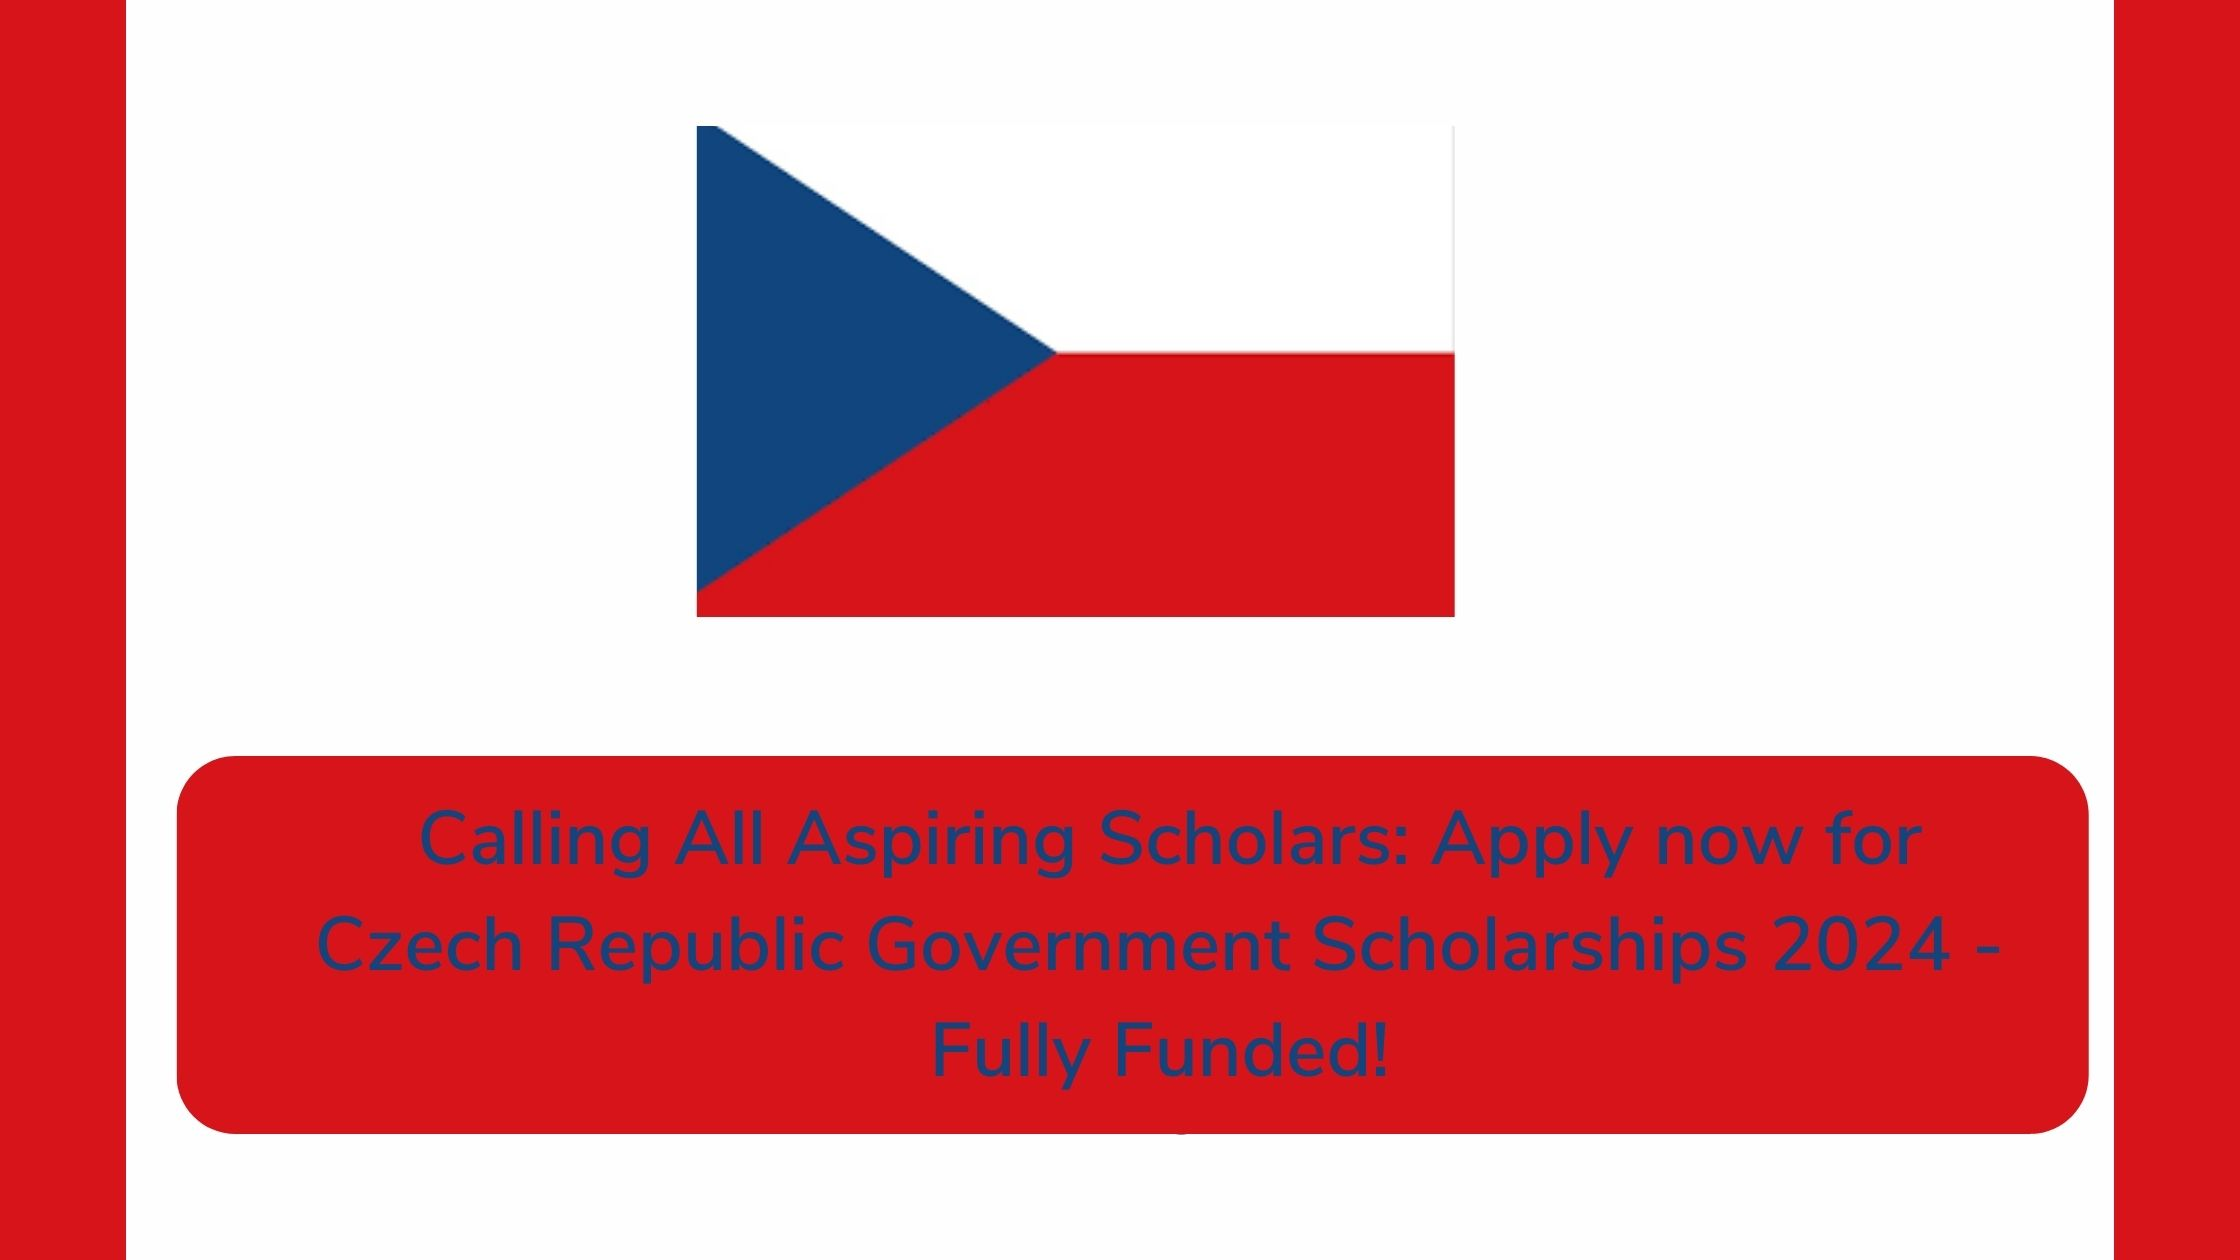 Calling All Aspiring Scholars: Apply now for Czech Republic Government Scholarships 2024 - Fully Funded!